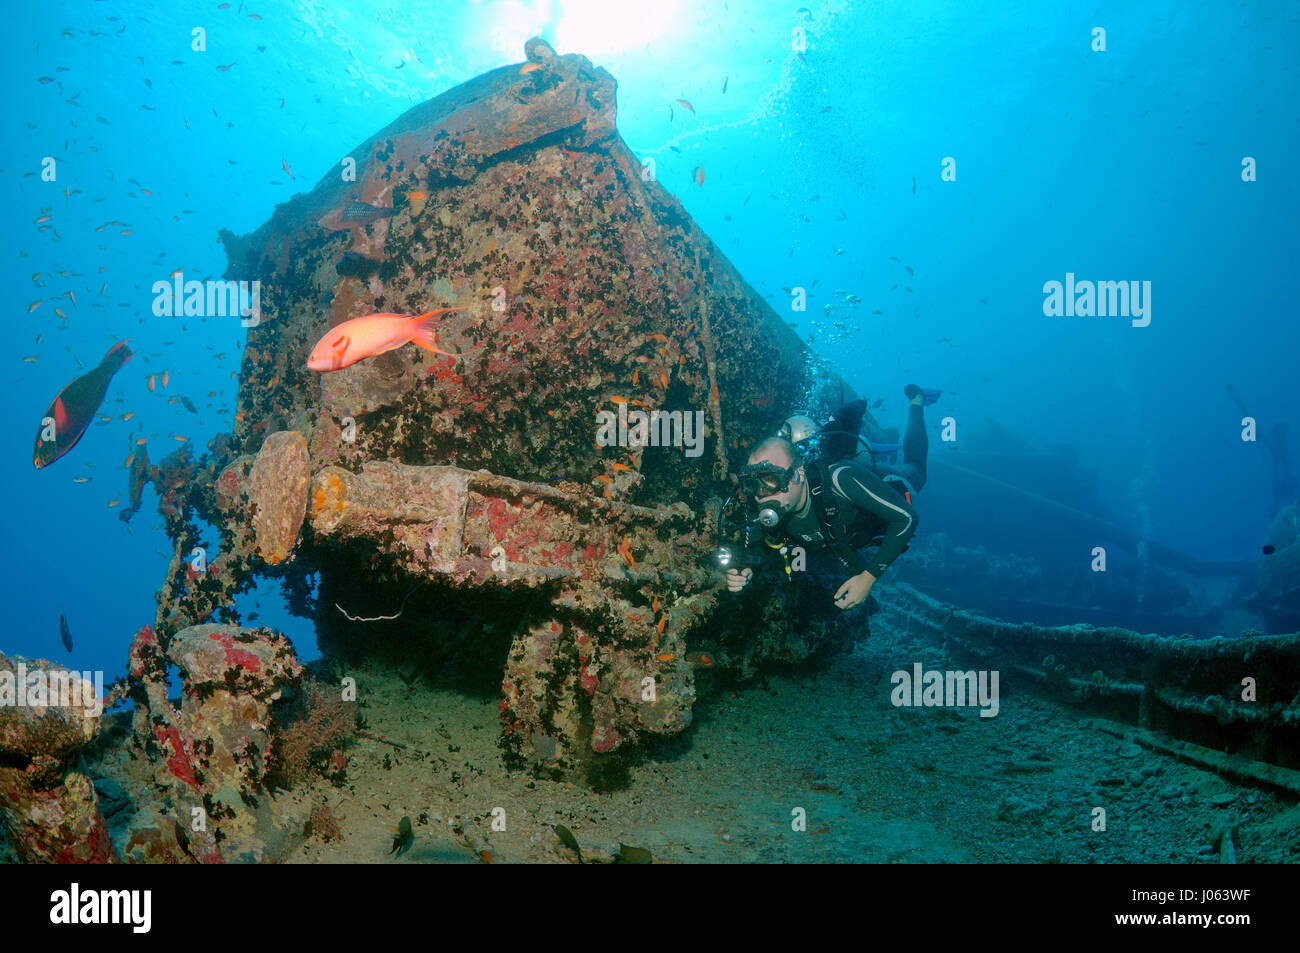 A diver swimming past a wrecked wagon. EERIE underwater pictures show inside the wreckage of the sunken British World War Two ship SS Thistlegorm on the seventy-fifth anniversary of her sinking. The series of images show the rusted remains of the merchant navy ship’s cargo which includes motorbikes, army trucks and an aircraft propeller. Other pictures show how sea life have been inhabiting the wreckage. Stock Photo